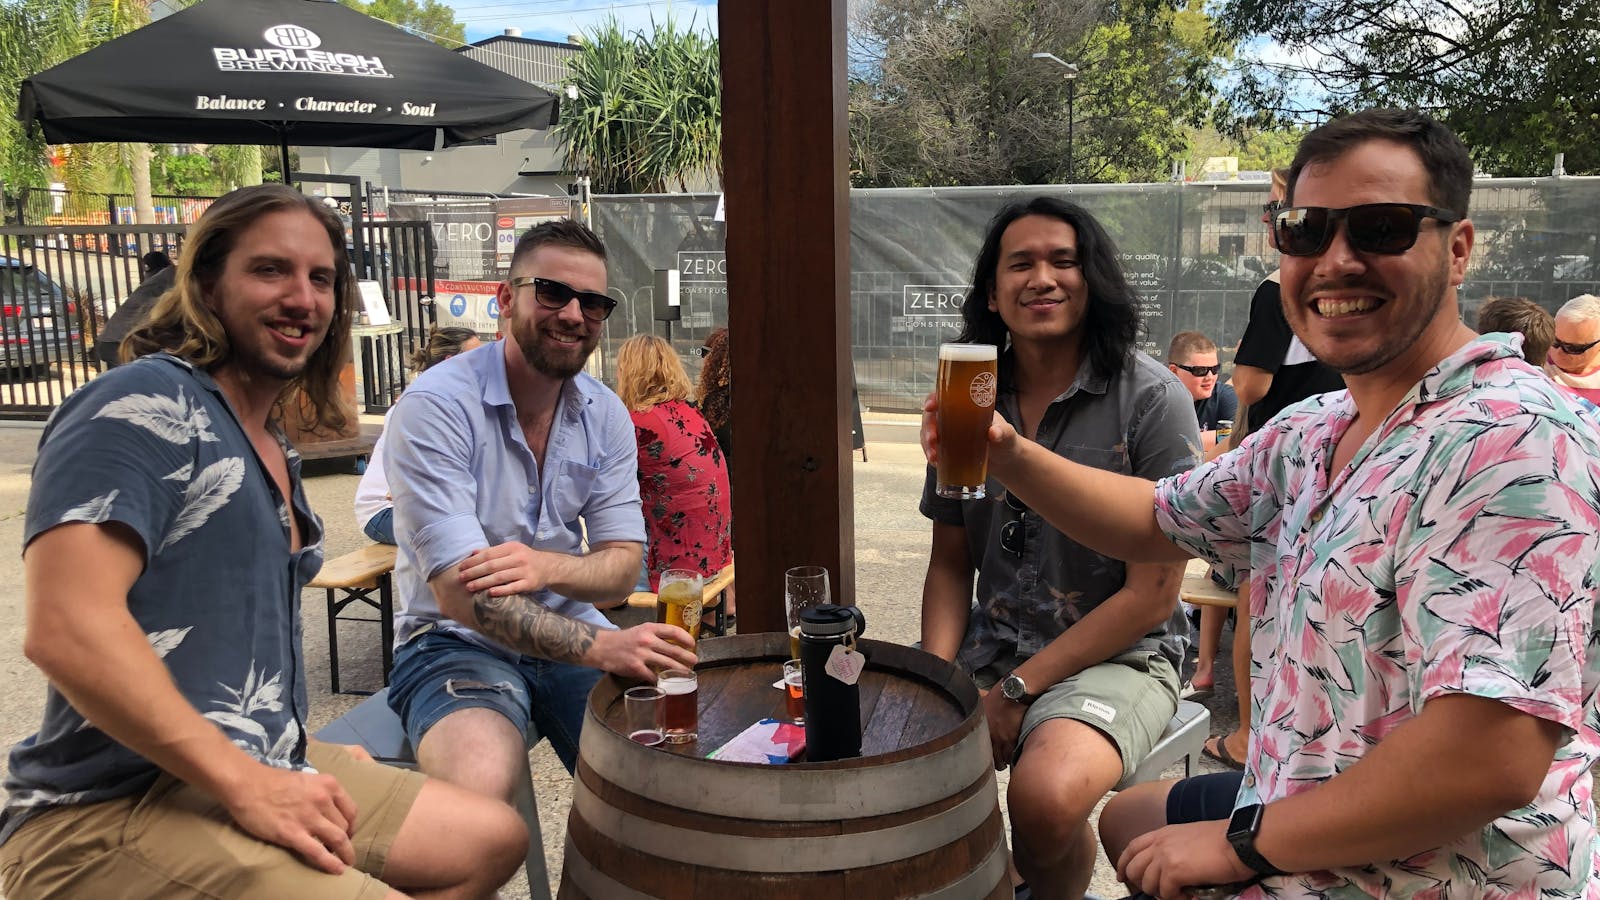 Kicking back in the sun with cold beers at Burleigh Brewing